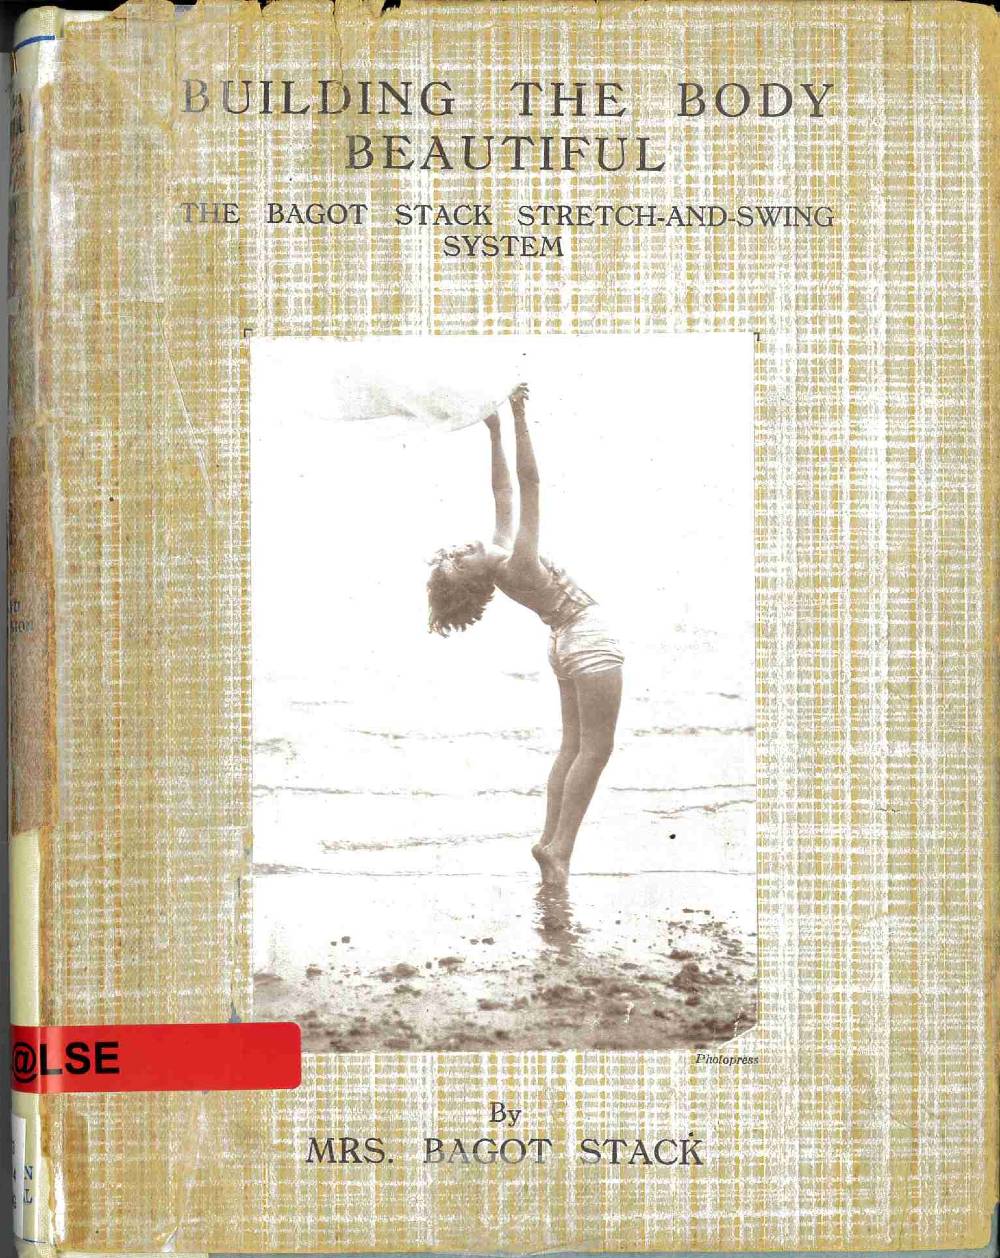 The front cover of a book. Includes a photo of someone on a beach stretching